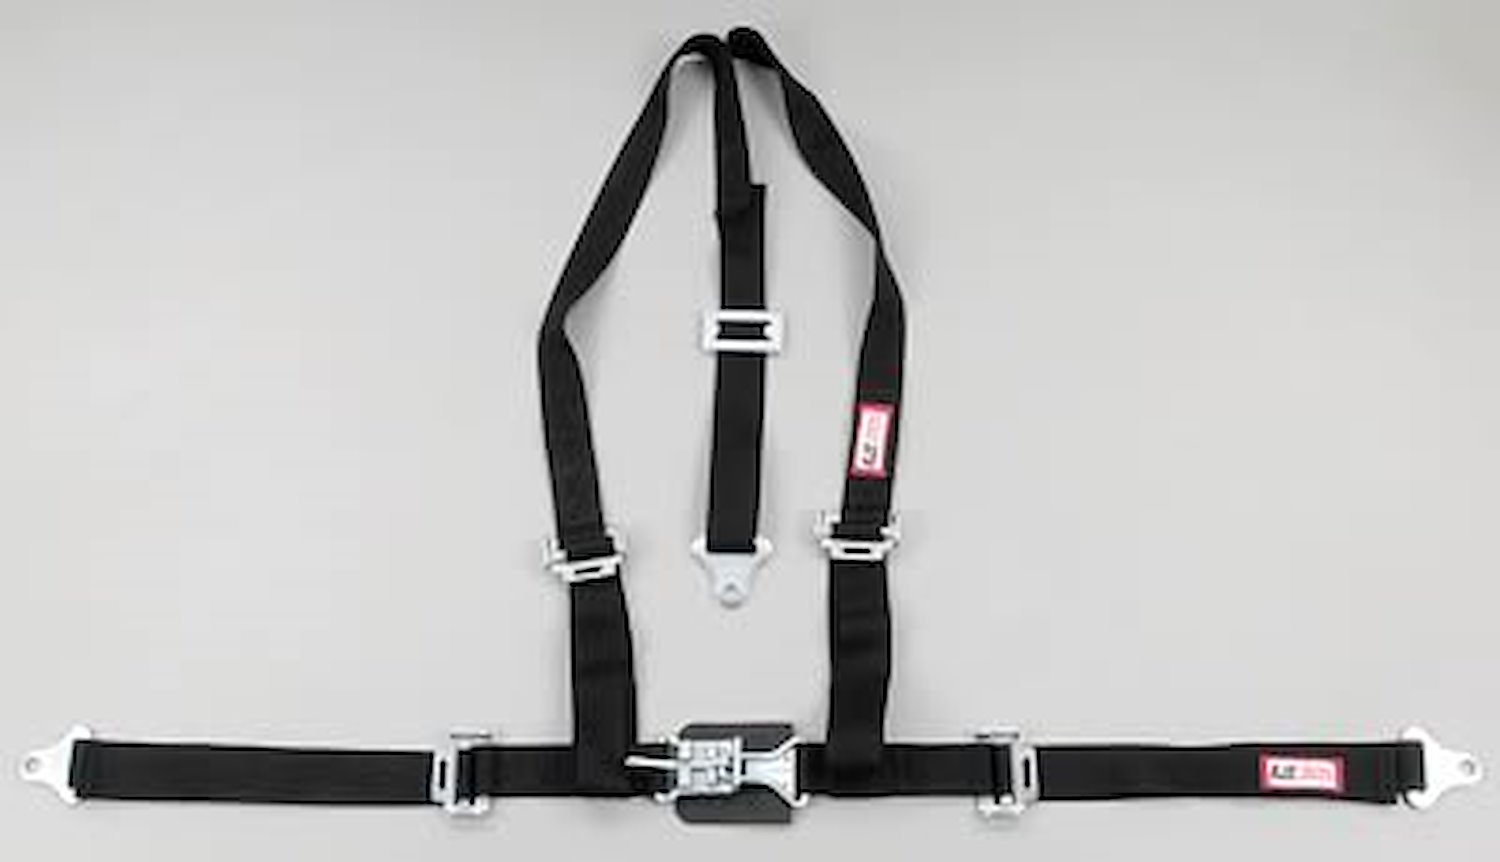 NON-SFI L&L HARNESS 2 PULL DOWN Lap Belt SEWN IN 2 S.H. INDIVIDUAL FLOOR Mount w/STERNUM STRAP ALL WRAP ENDS BLACK